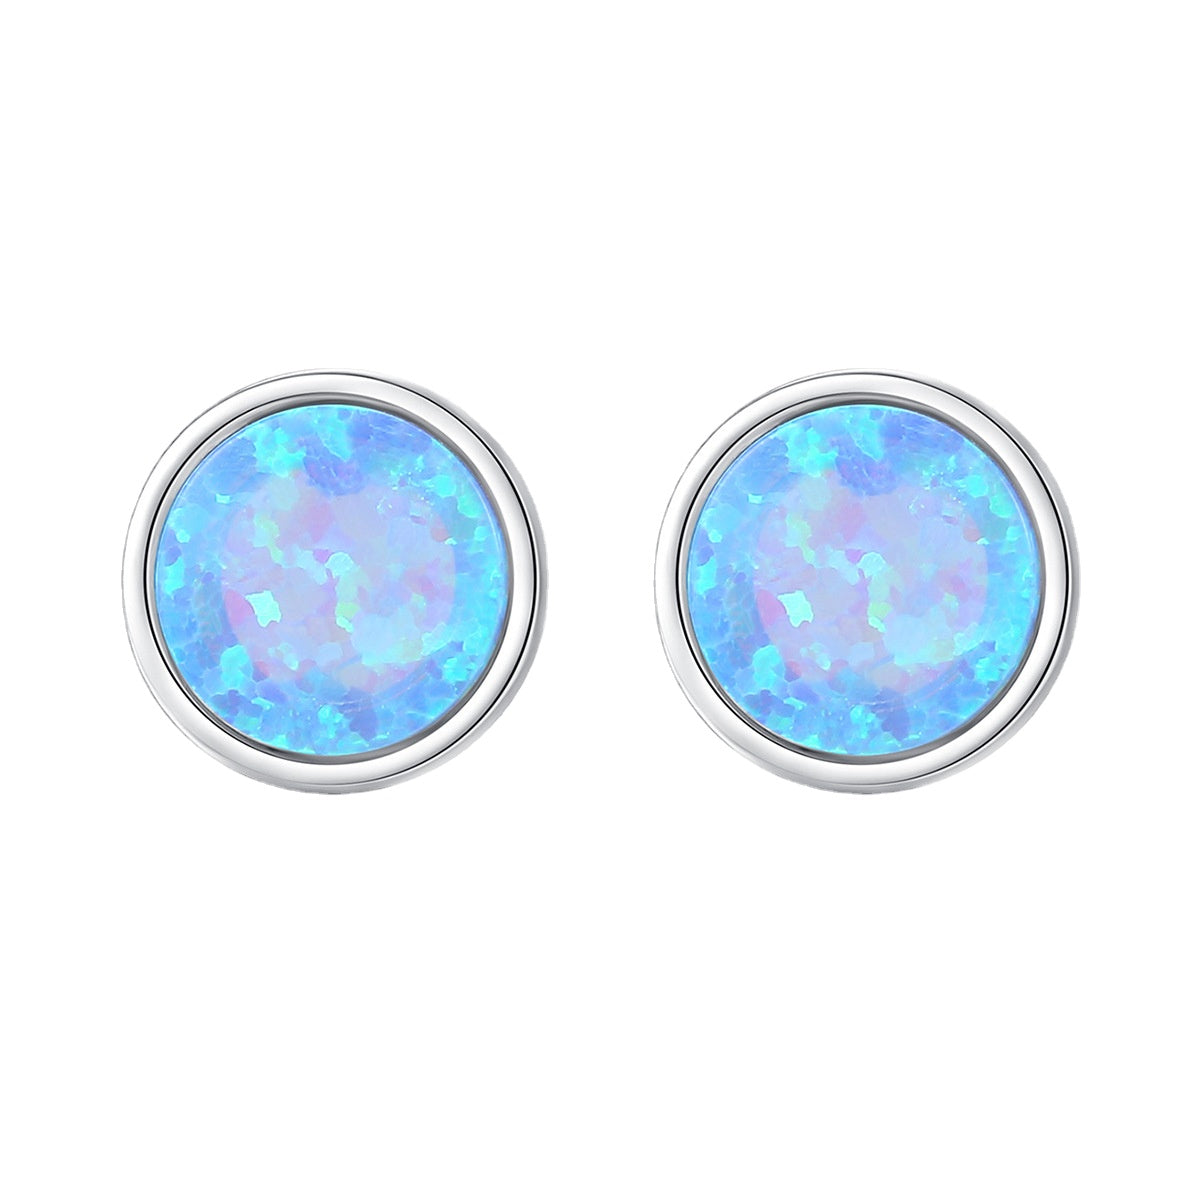 Gemestonely-Chic S925 Silver Round Simulated Opal Stud Earrings - Trendy Inspired Minimalist Ear Jewelry